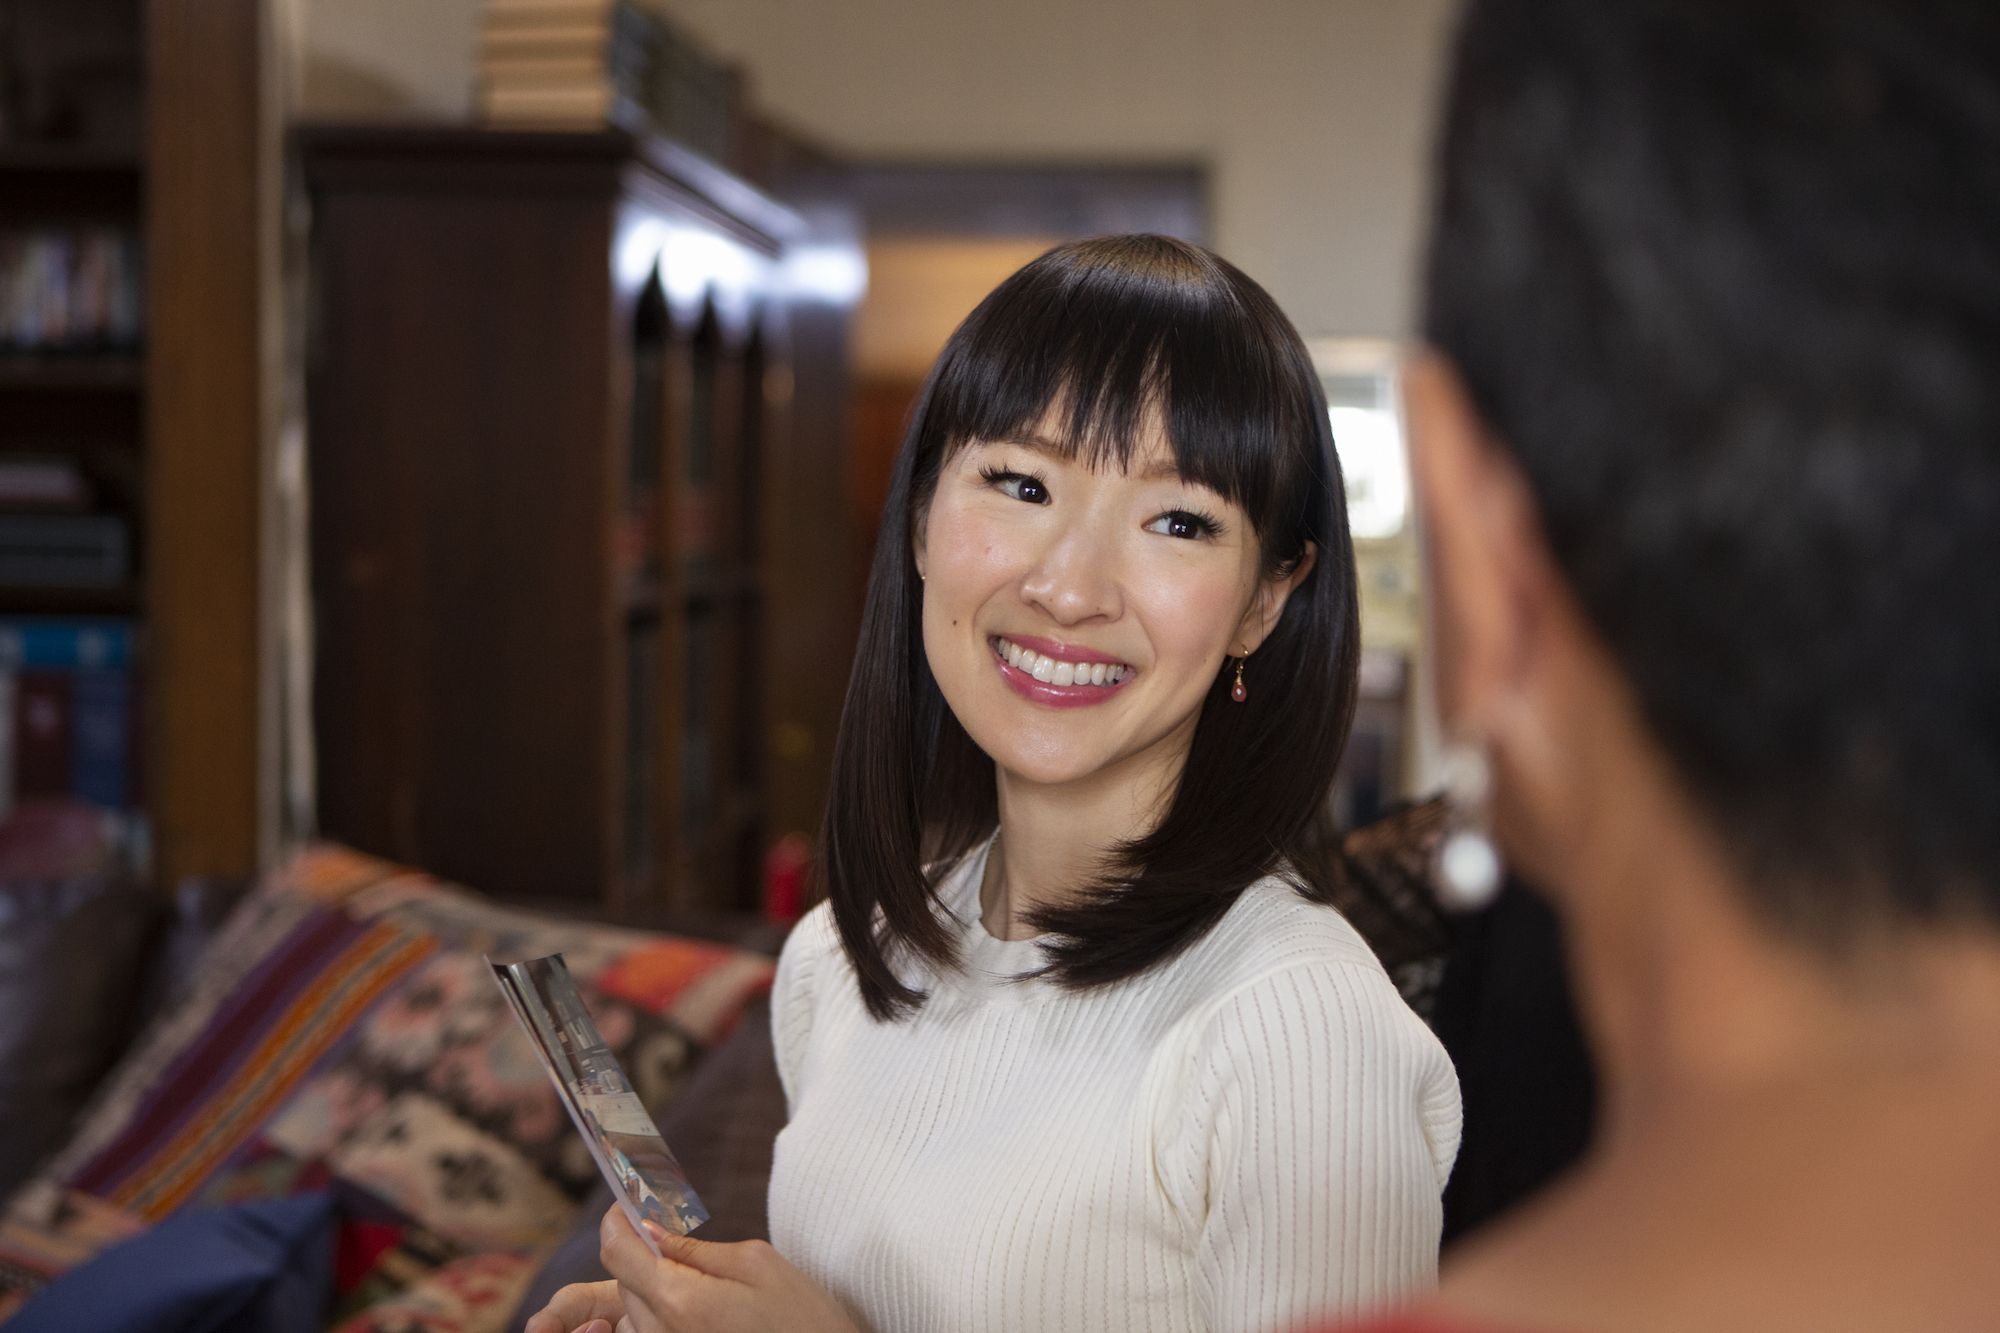 Will Netflixs Tidying Up With Marie Kondo Change Your Life?